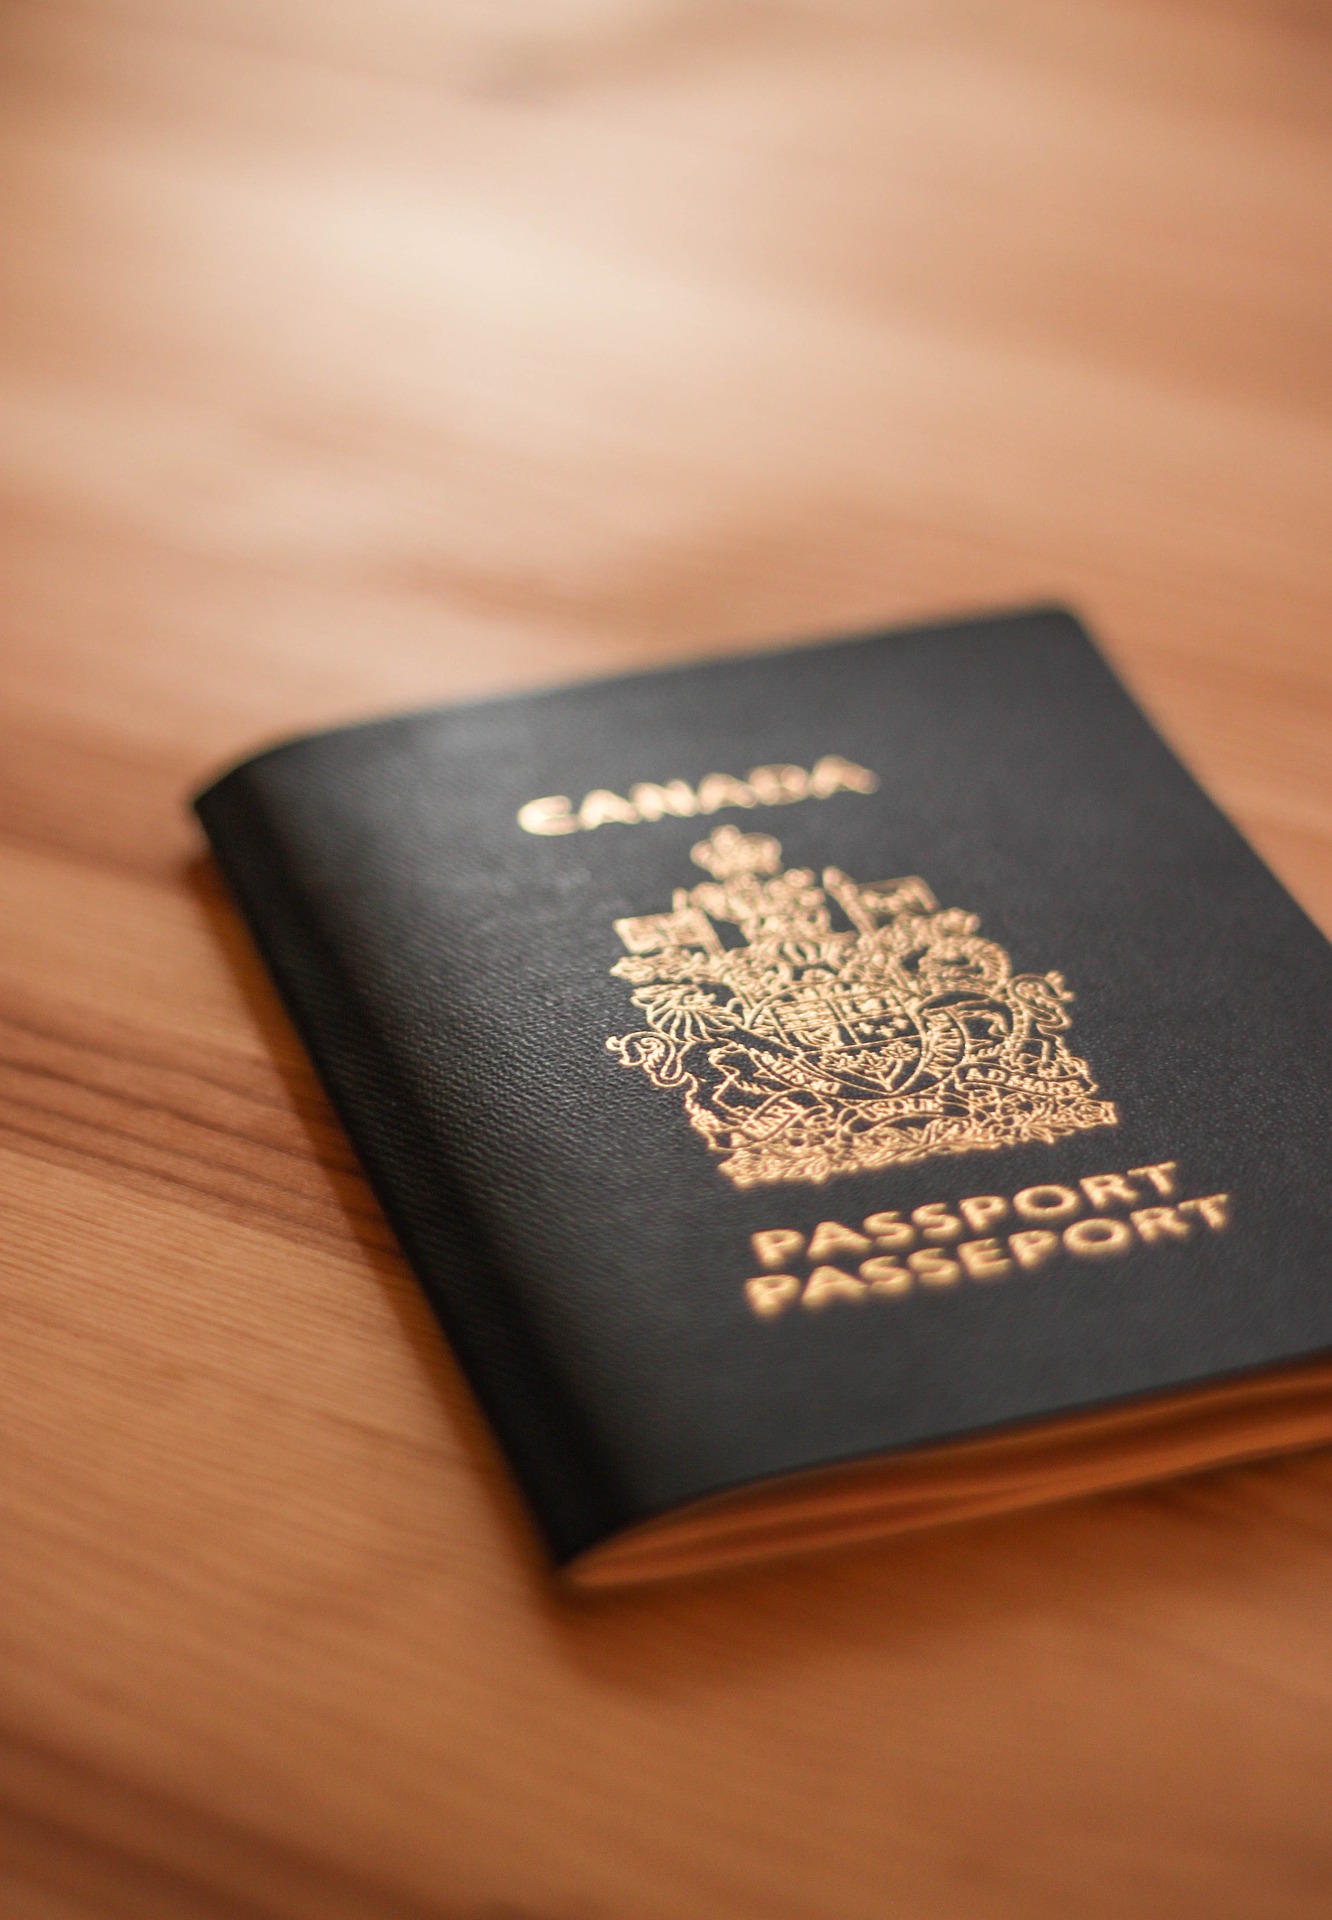 Featured image for “Baker et. al. v. Canada (Passports)”